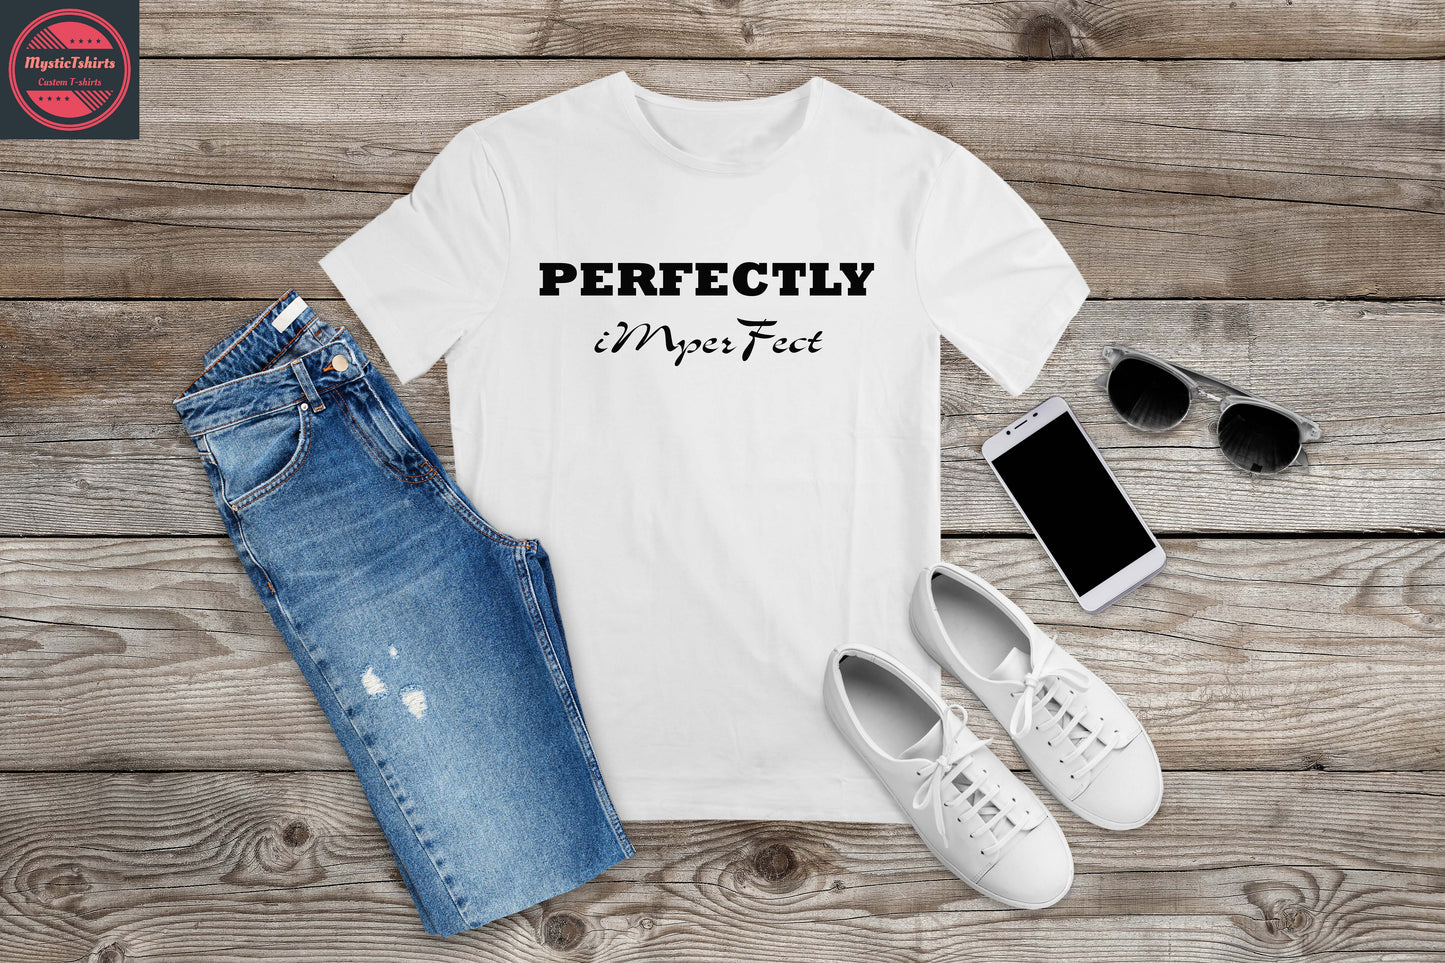 399. PERFECTLY IMPERFECT, Custom Made Shirt, Personalized T-Shirt, Custom Text, Make Your Own Shirt, Custom Tee